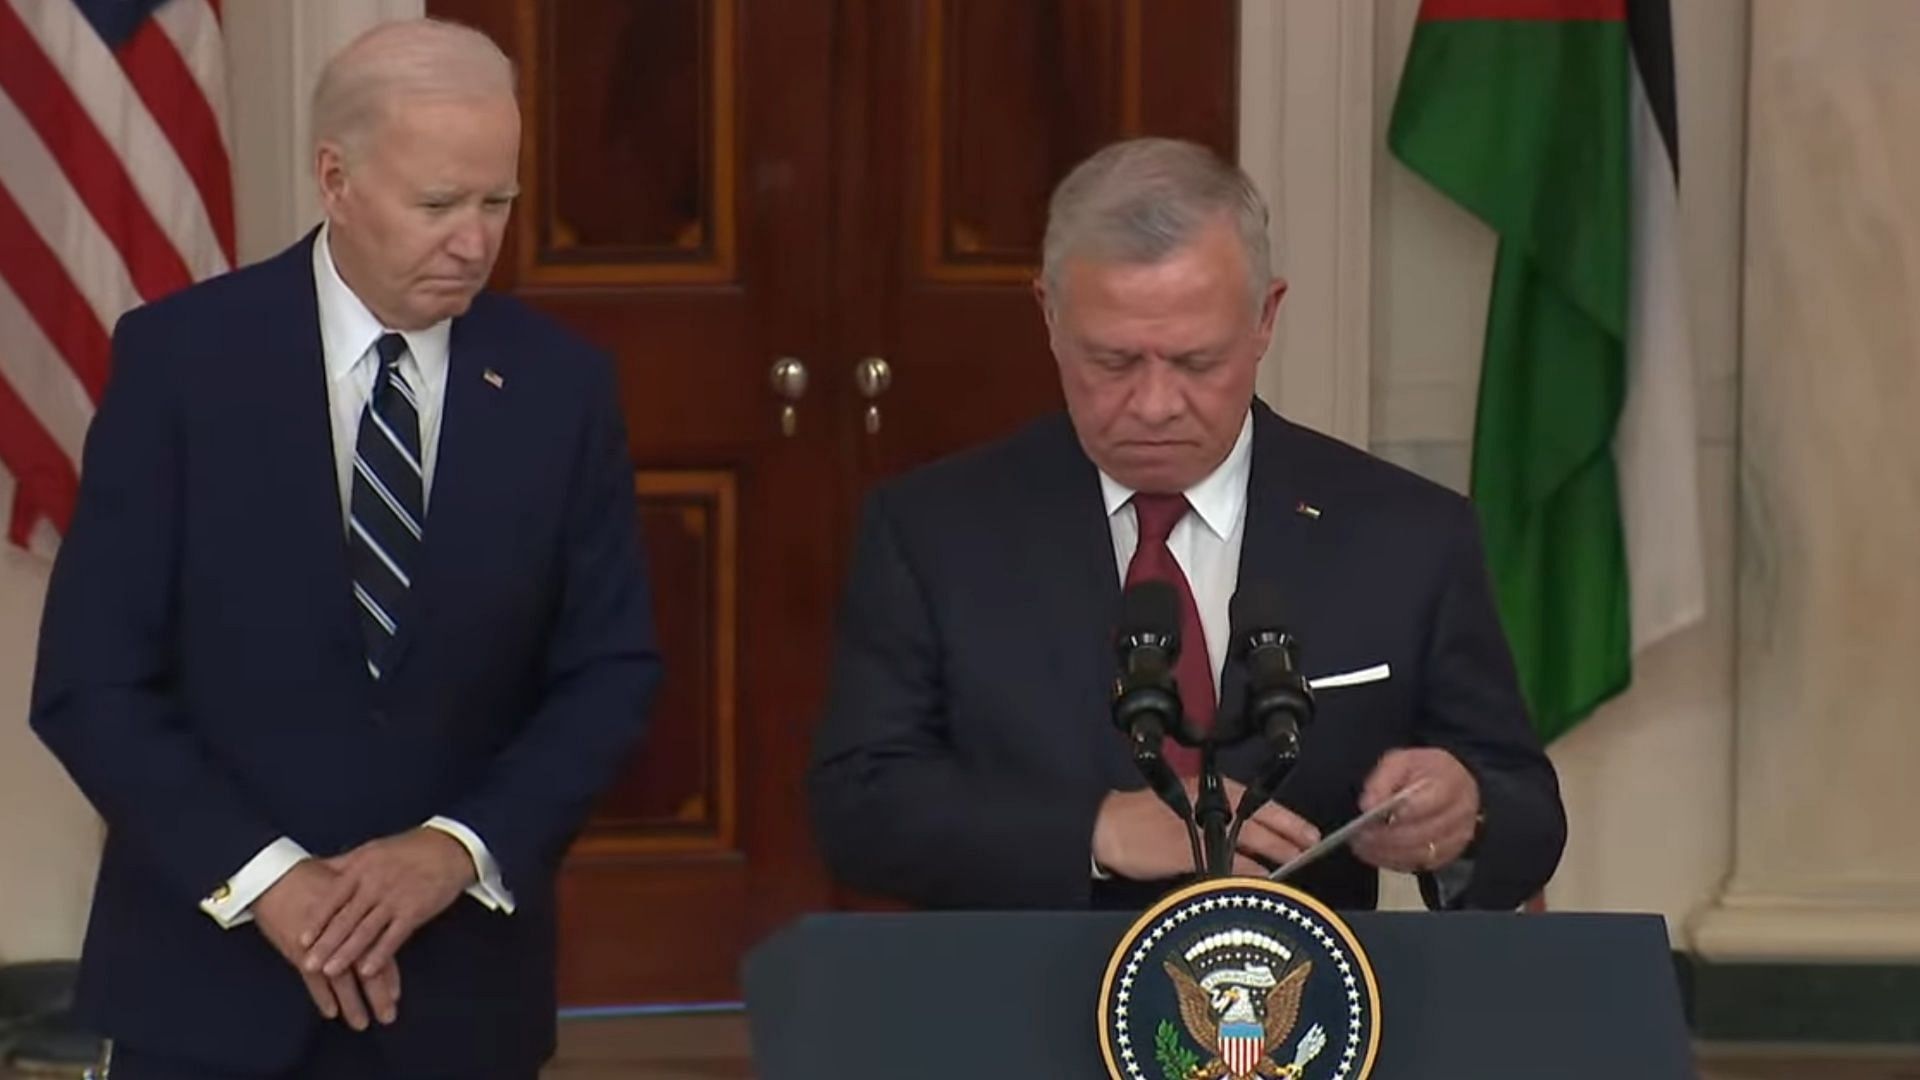 Joe Biden gets trolled for on-stage confusion (Image via YouTube/The White House)